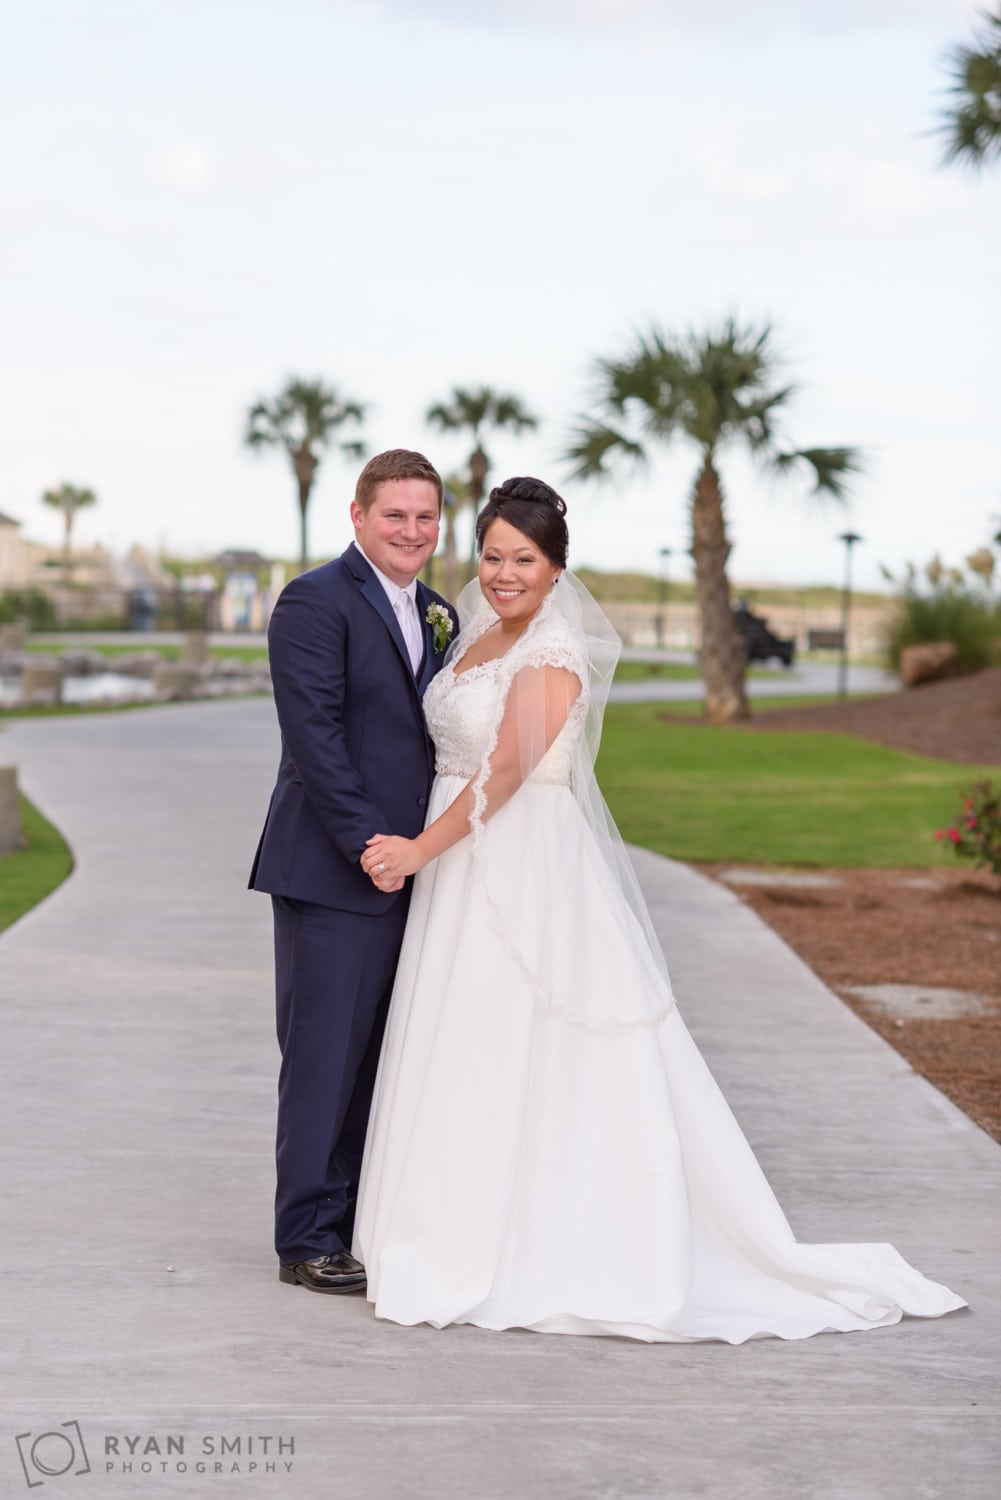 Pictures with the bride and groom on the beach - North Myrtle Beach